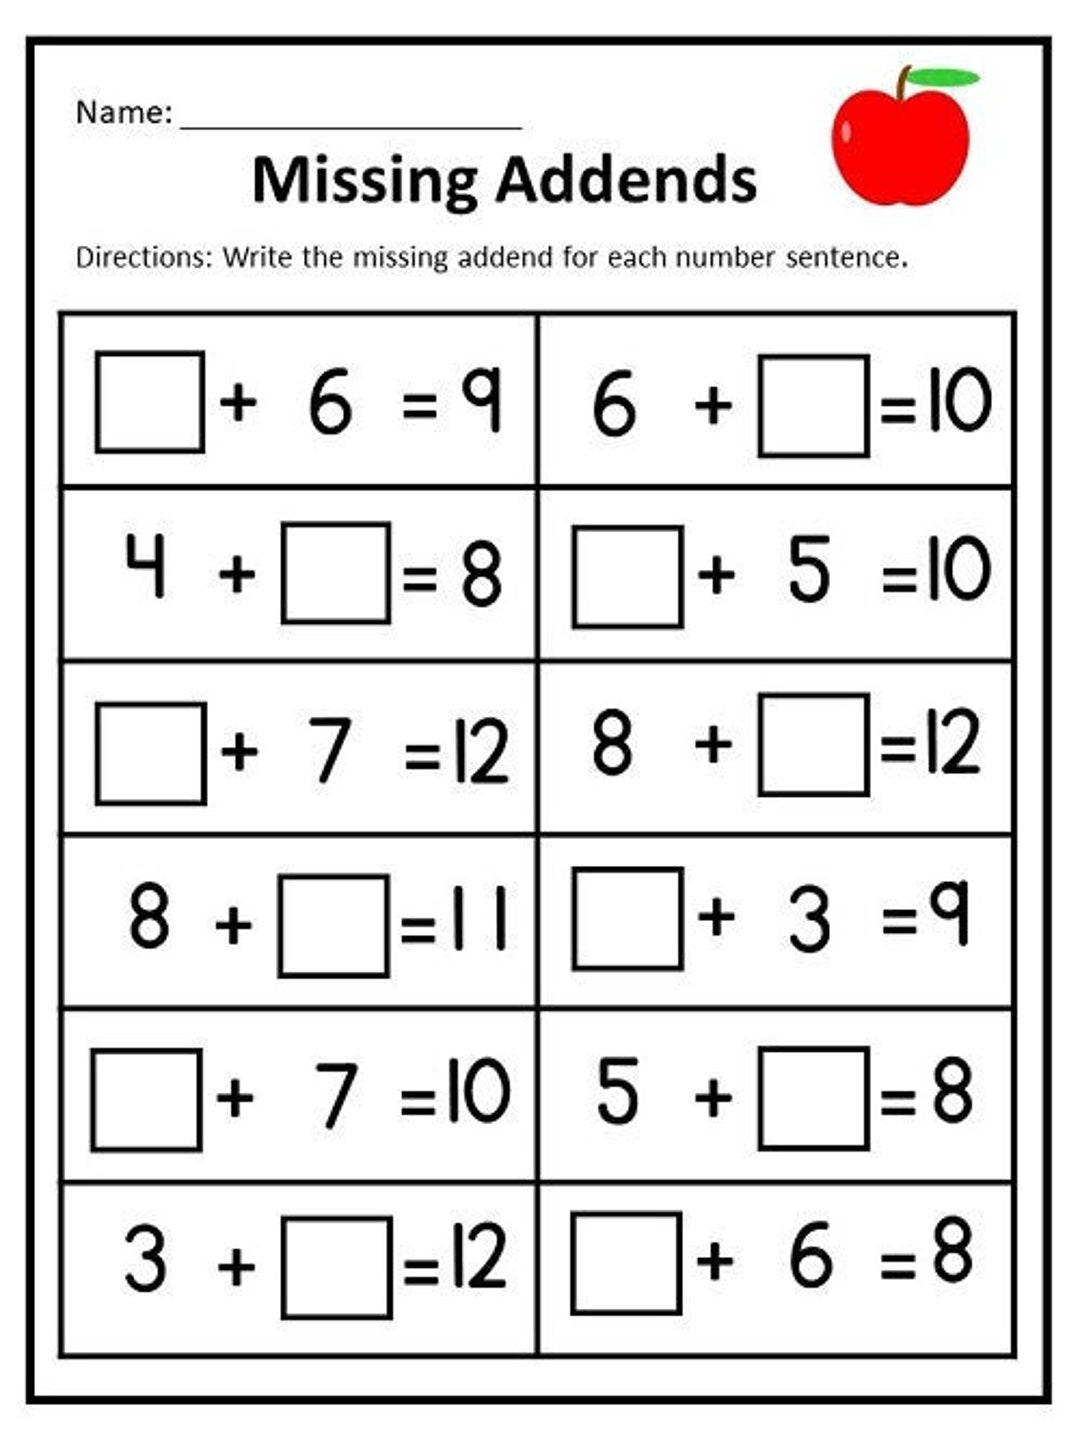 10 Printable Missing Addends Worksheets Numbers 1 20 For Etsy New Zealand